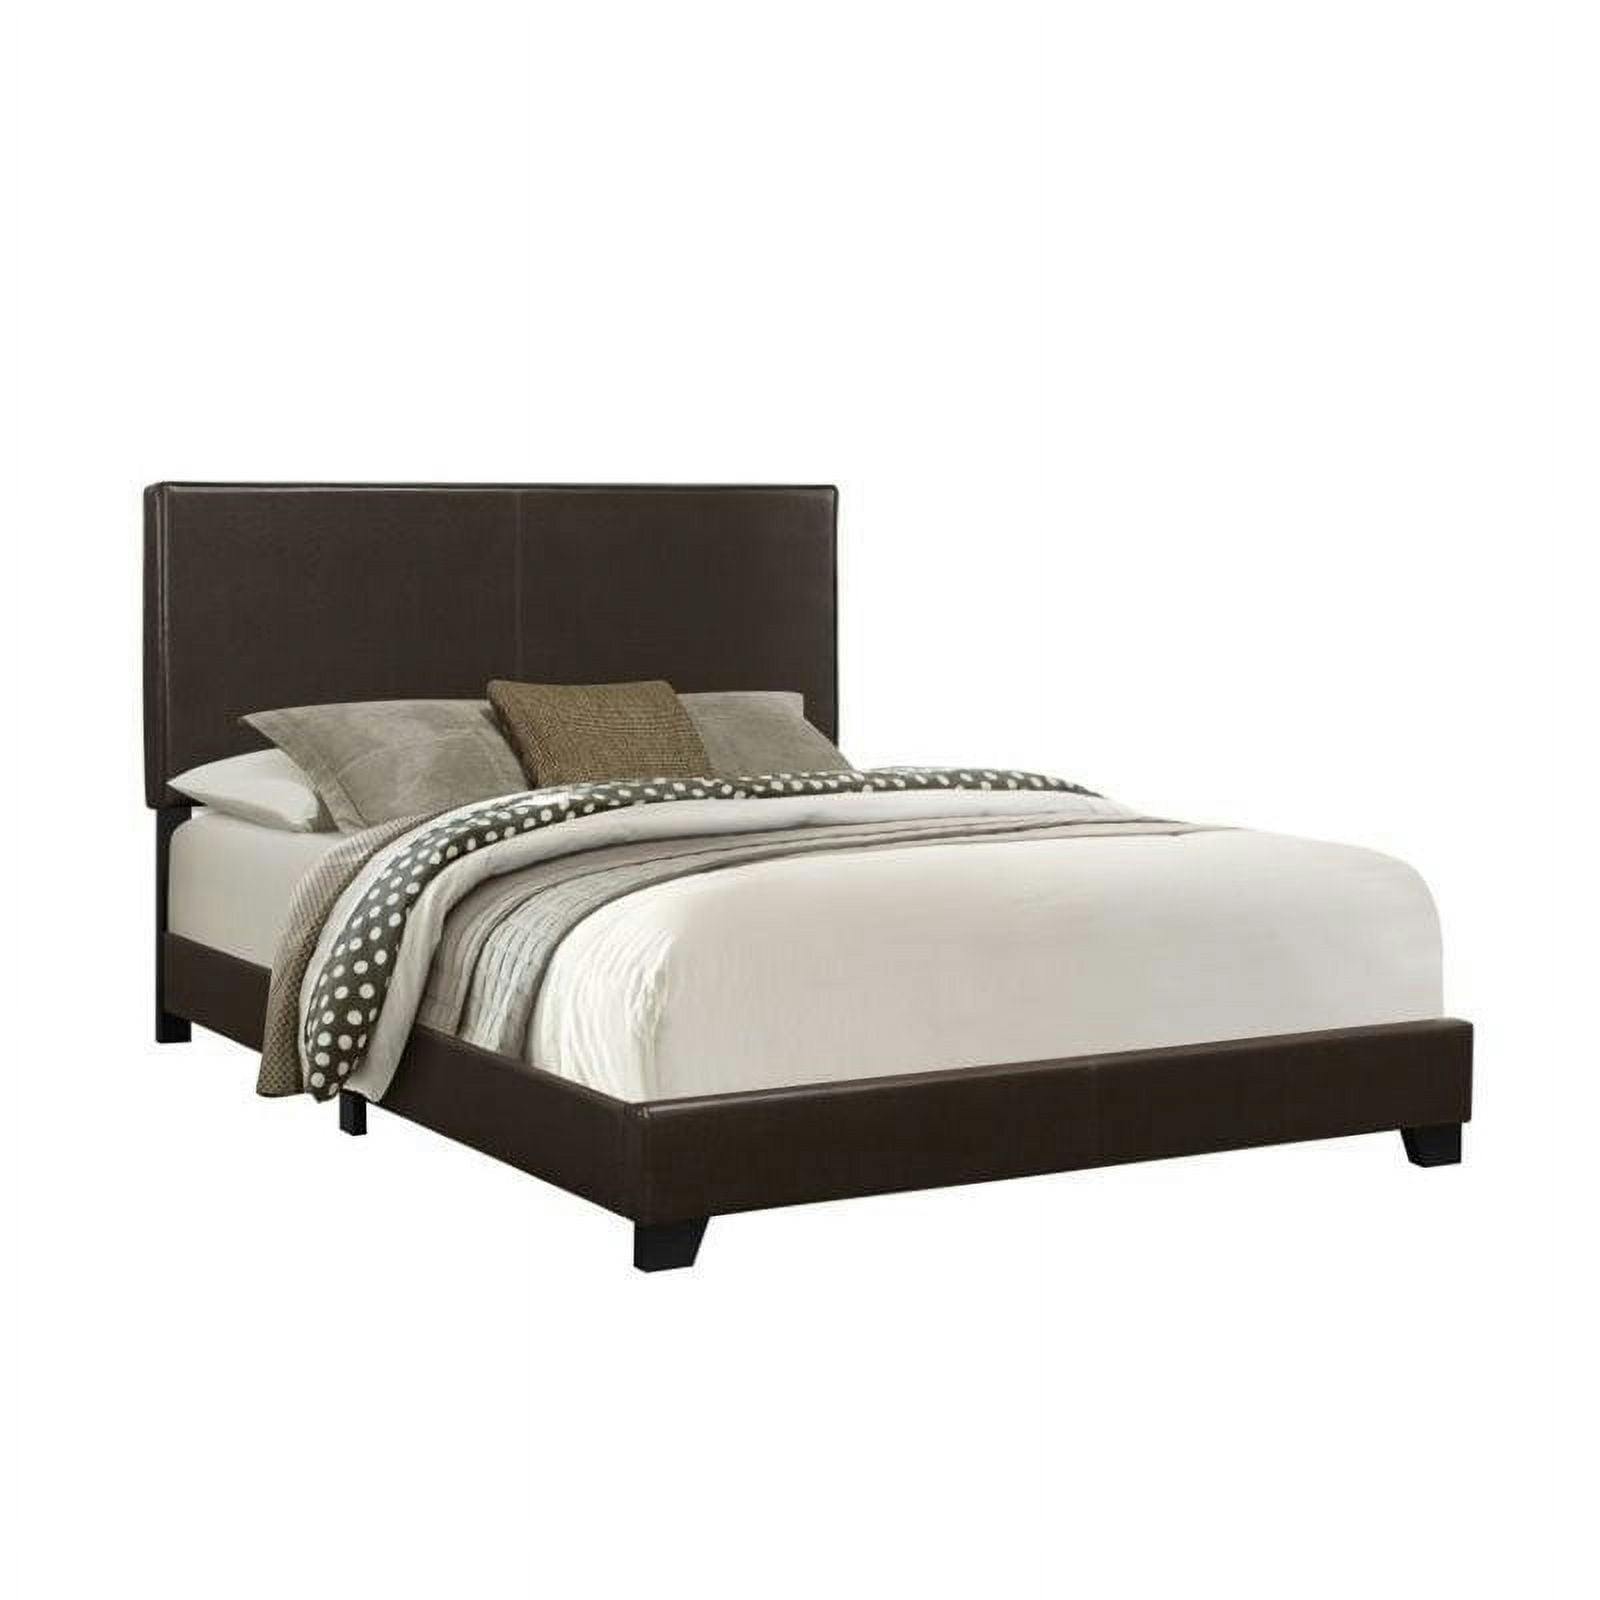 Transitional Queen Bed with Nailhead Trim in Dark Brown Leather